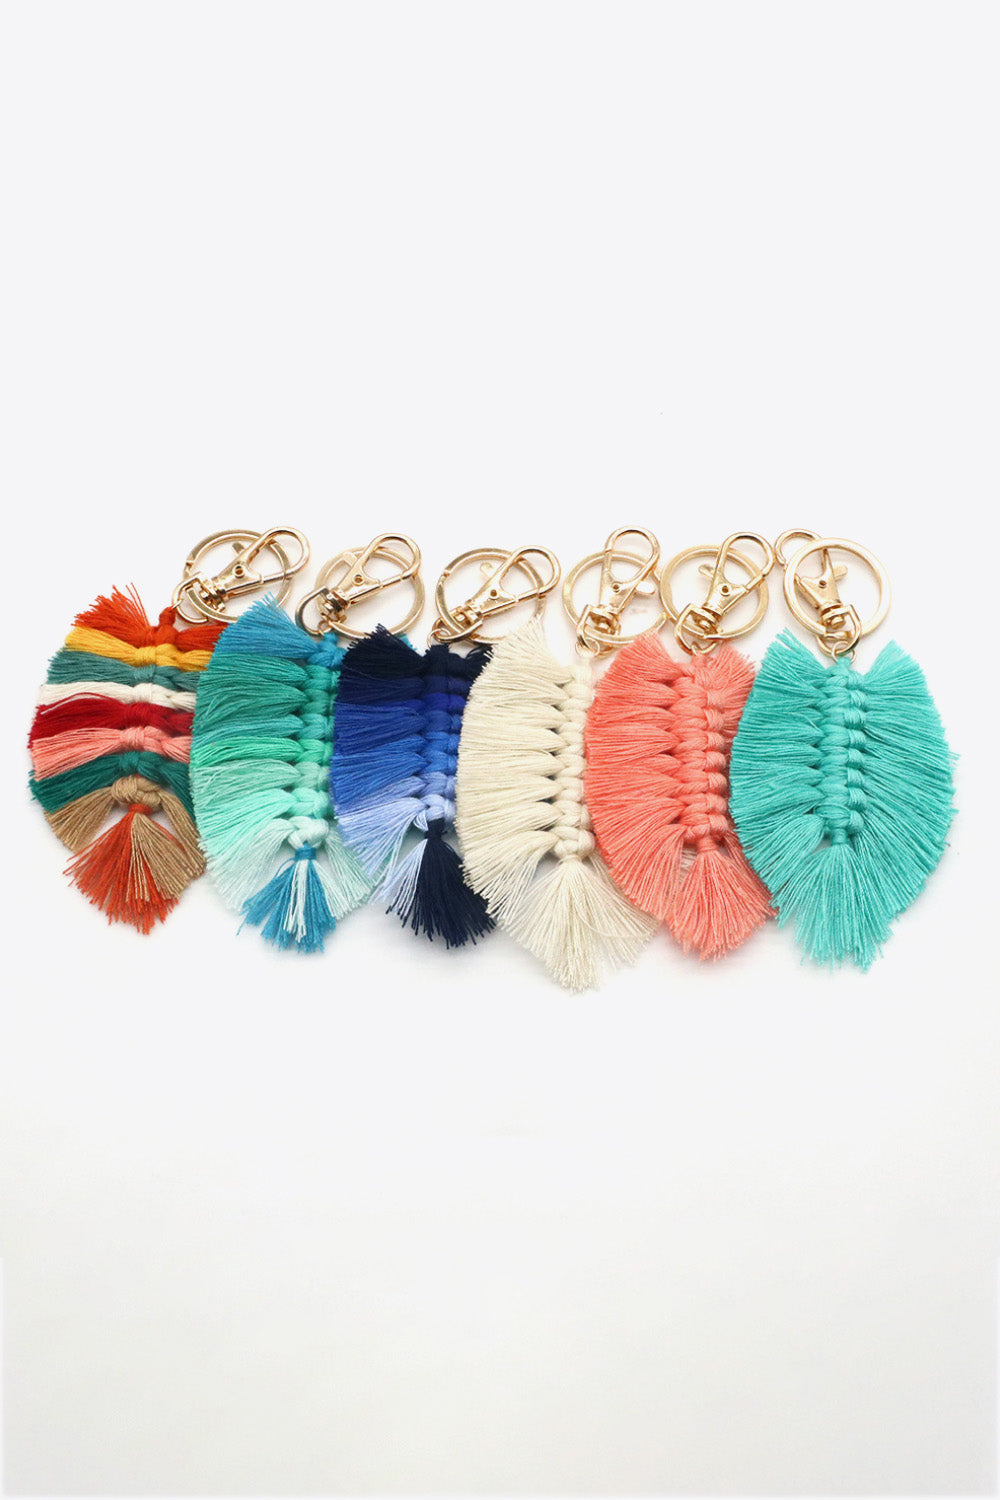 Trendsi Cupid Beauty Supplies Keychains Assorted 4-Pack Leaf Shape Fringe Keychain